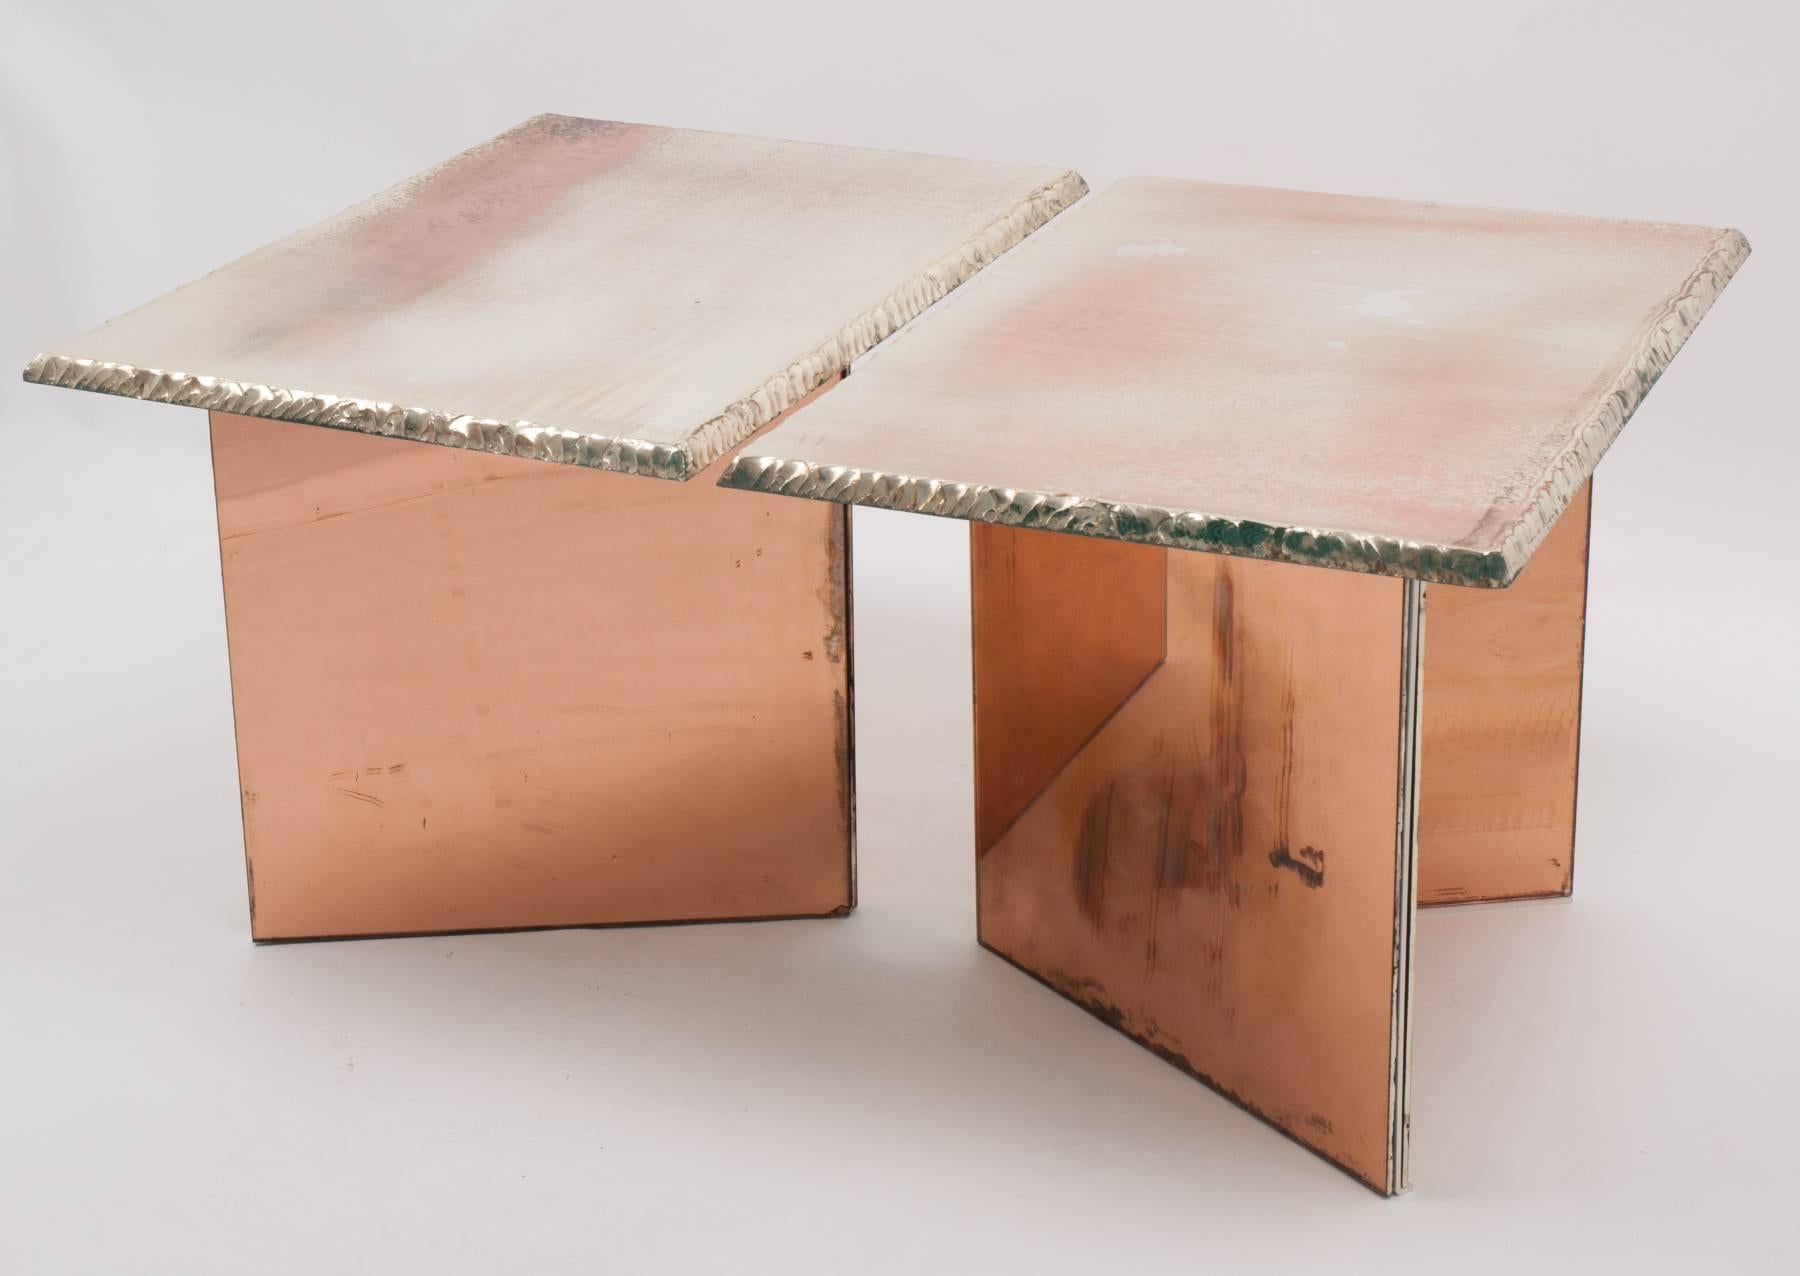 Italian Fly Coffee Table, Two Separate Elements Coated Silvered Glass 70x50cm each one